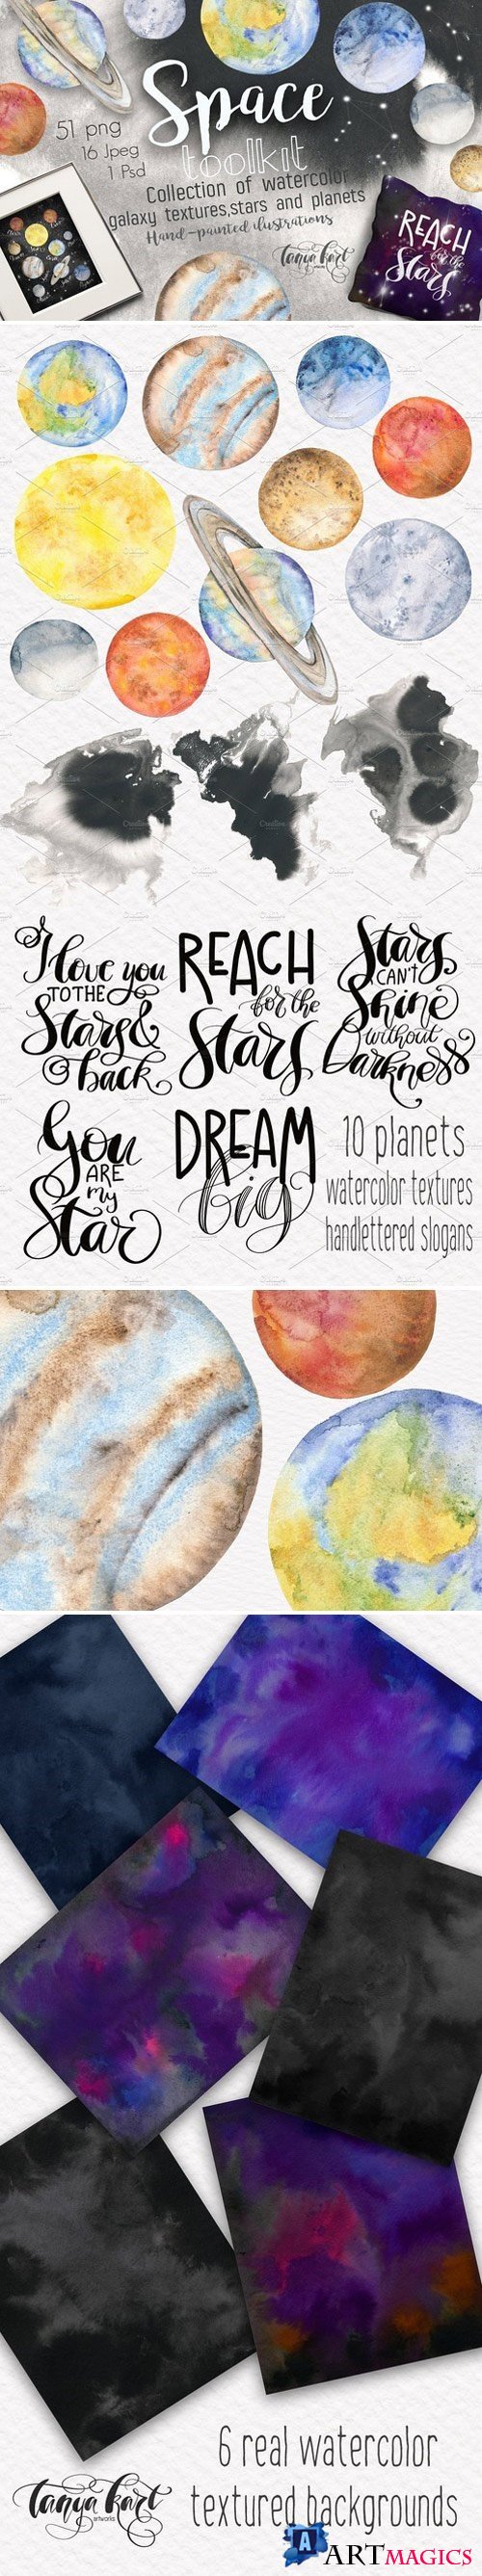 Space Toolkit Watercolor Planets 2354644